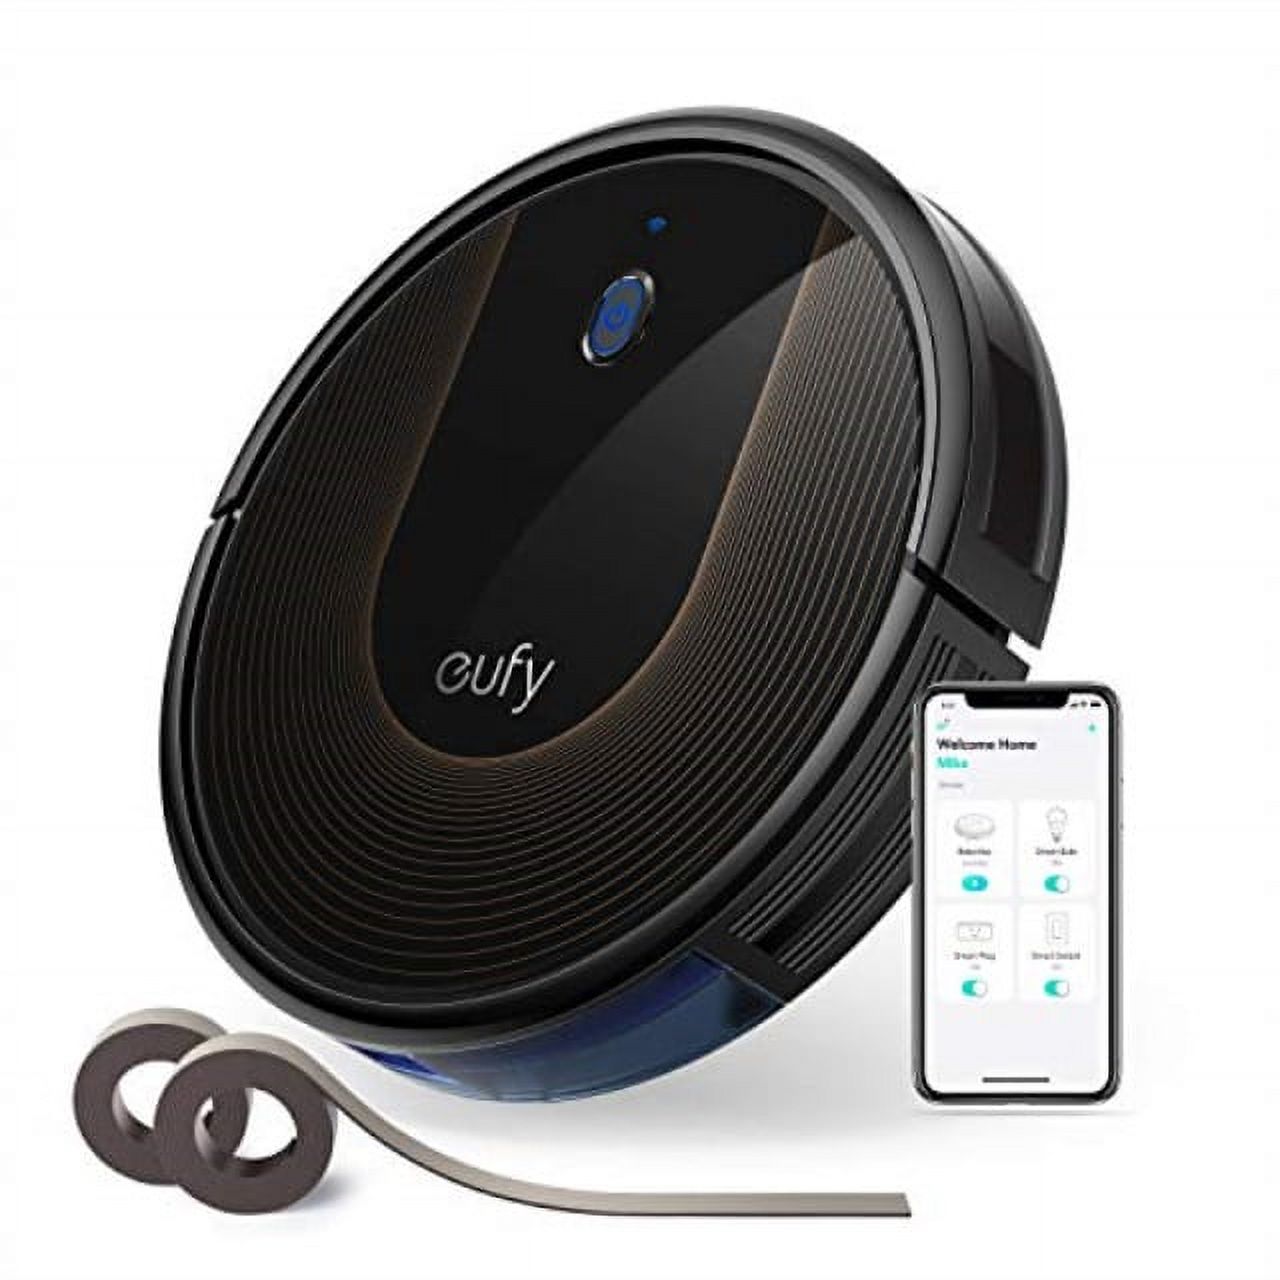 eufy [boostiq] robovac 30c, robot vacuum cleaner, wi-fi, super-thin, 1500pa suction, boundary strips included, quiet, self-charging robotic vacuum cleaner, cleans hard floors to medium-pile carpets - image 1 of 6